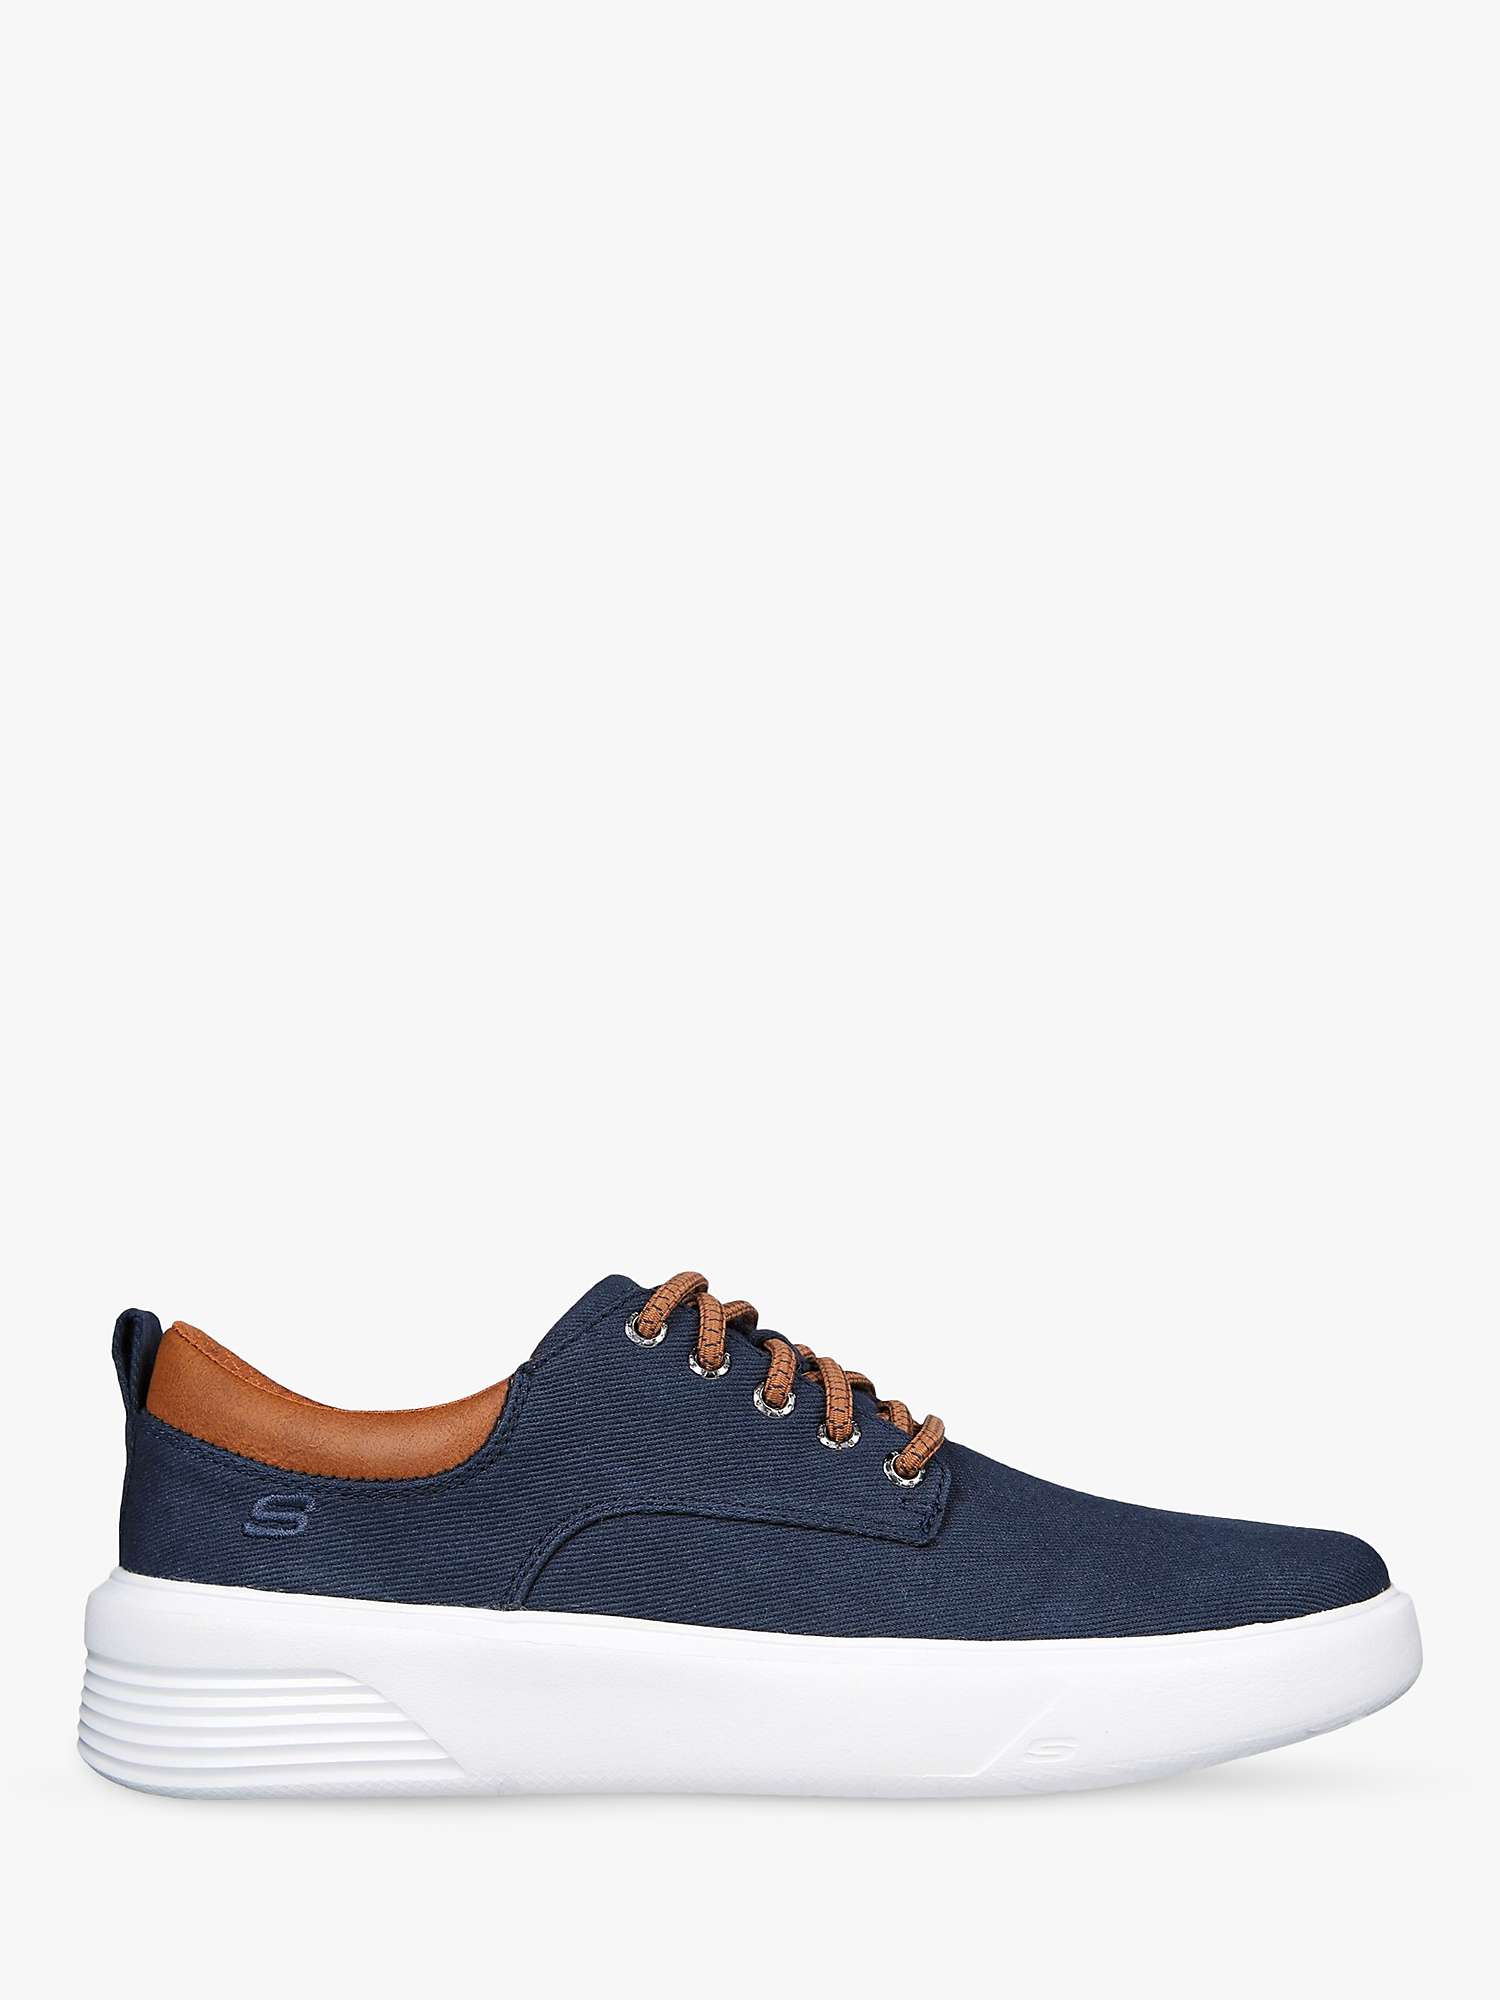 Buy Skechers Viewson Doriano Shoes, Navy Online at johnlewis.com